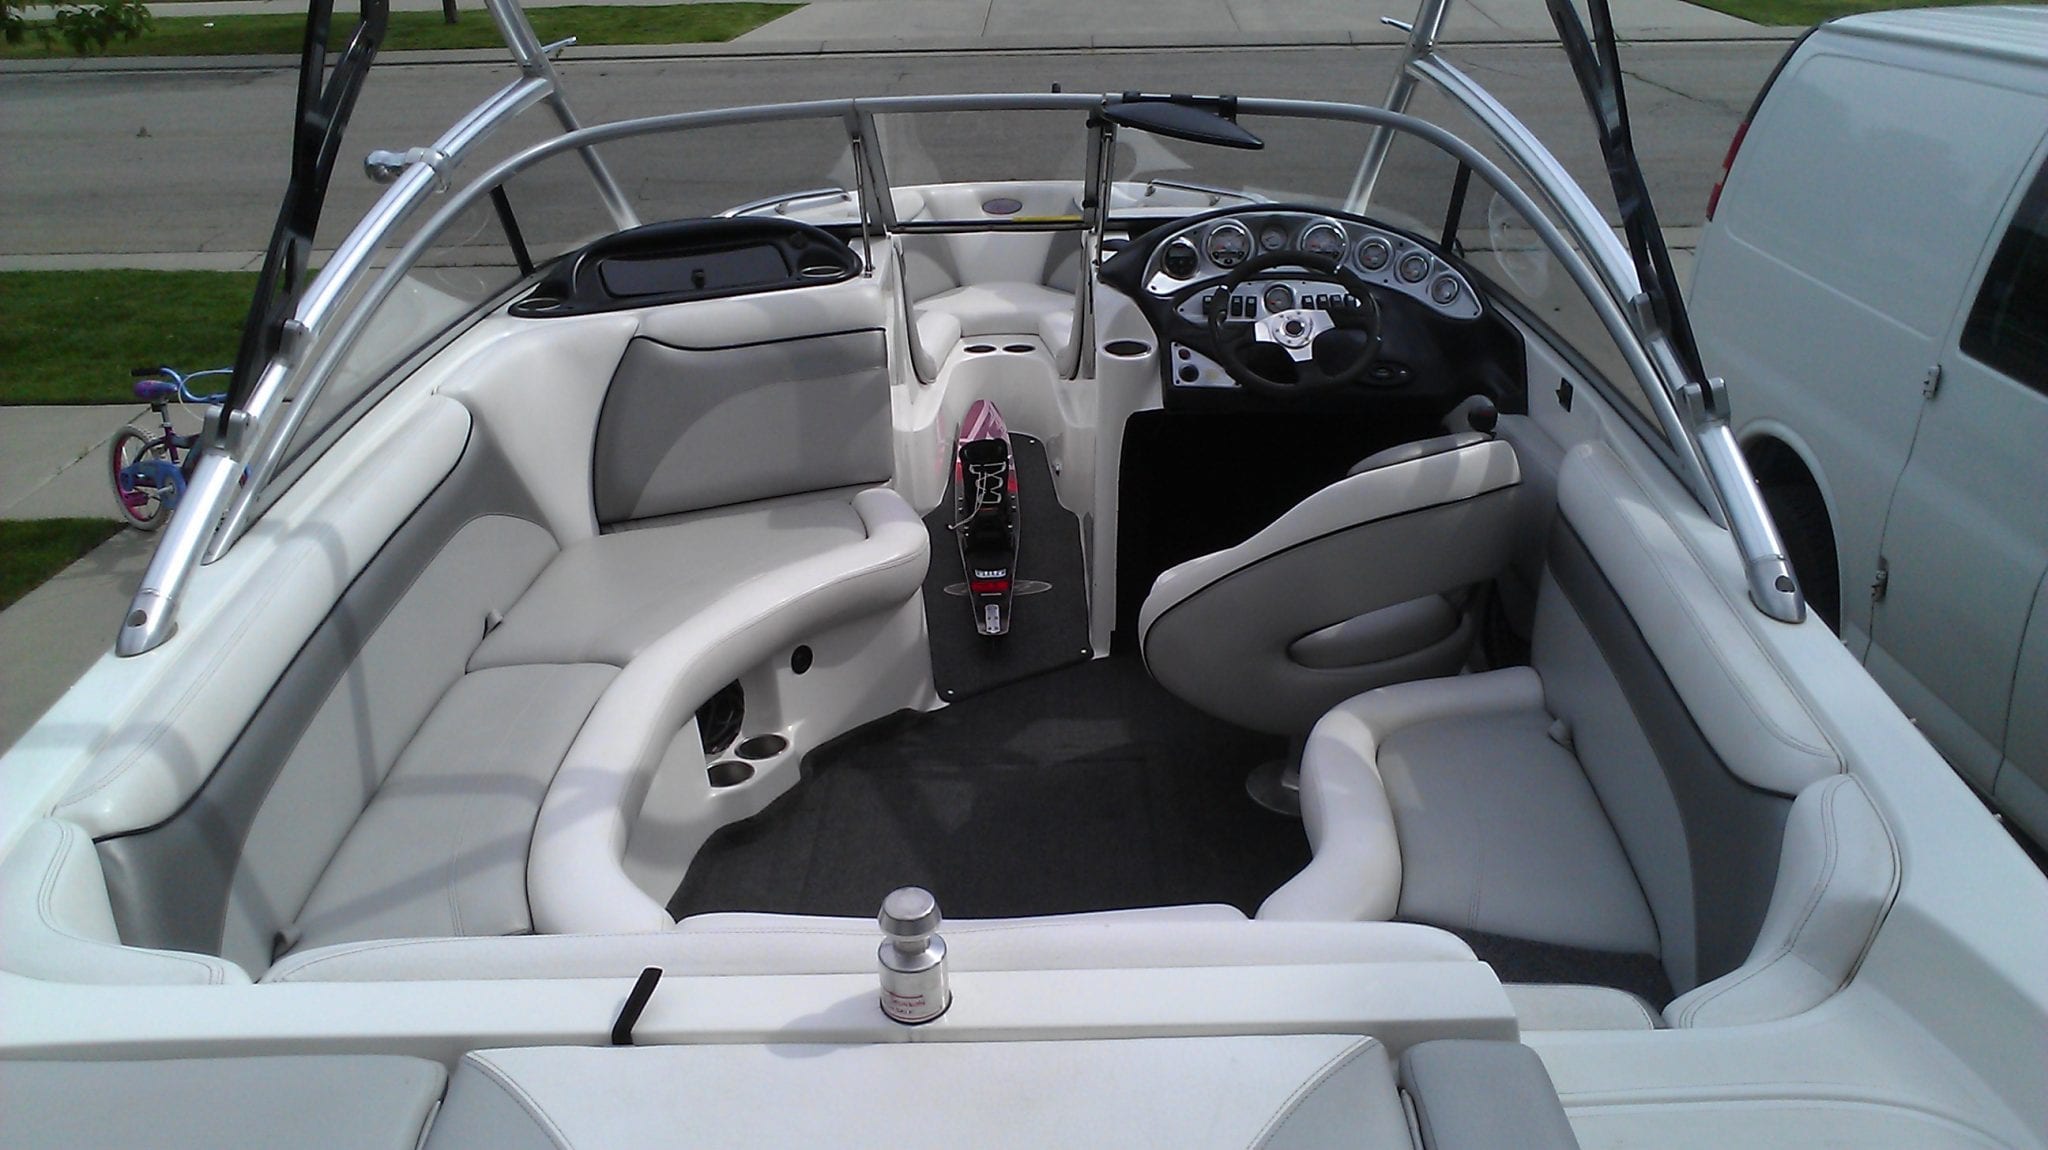 Boat interior detailed.